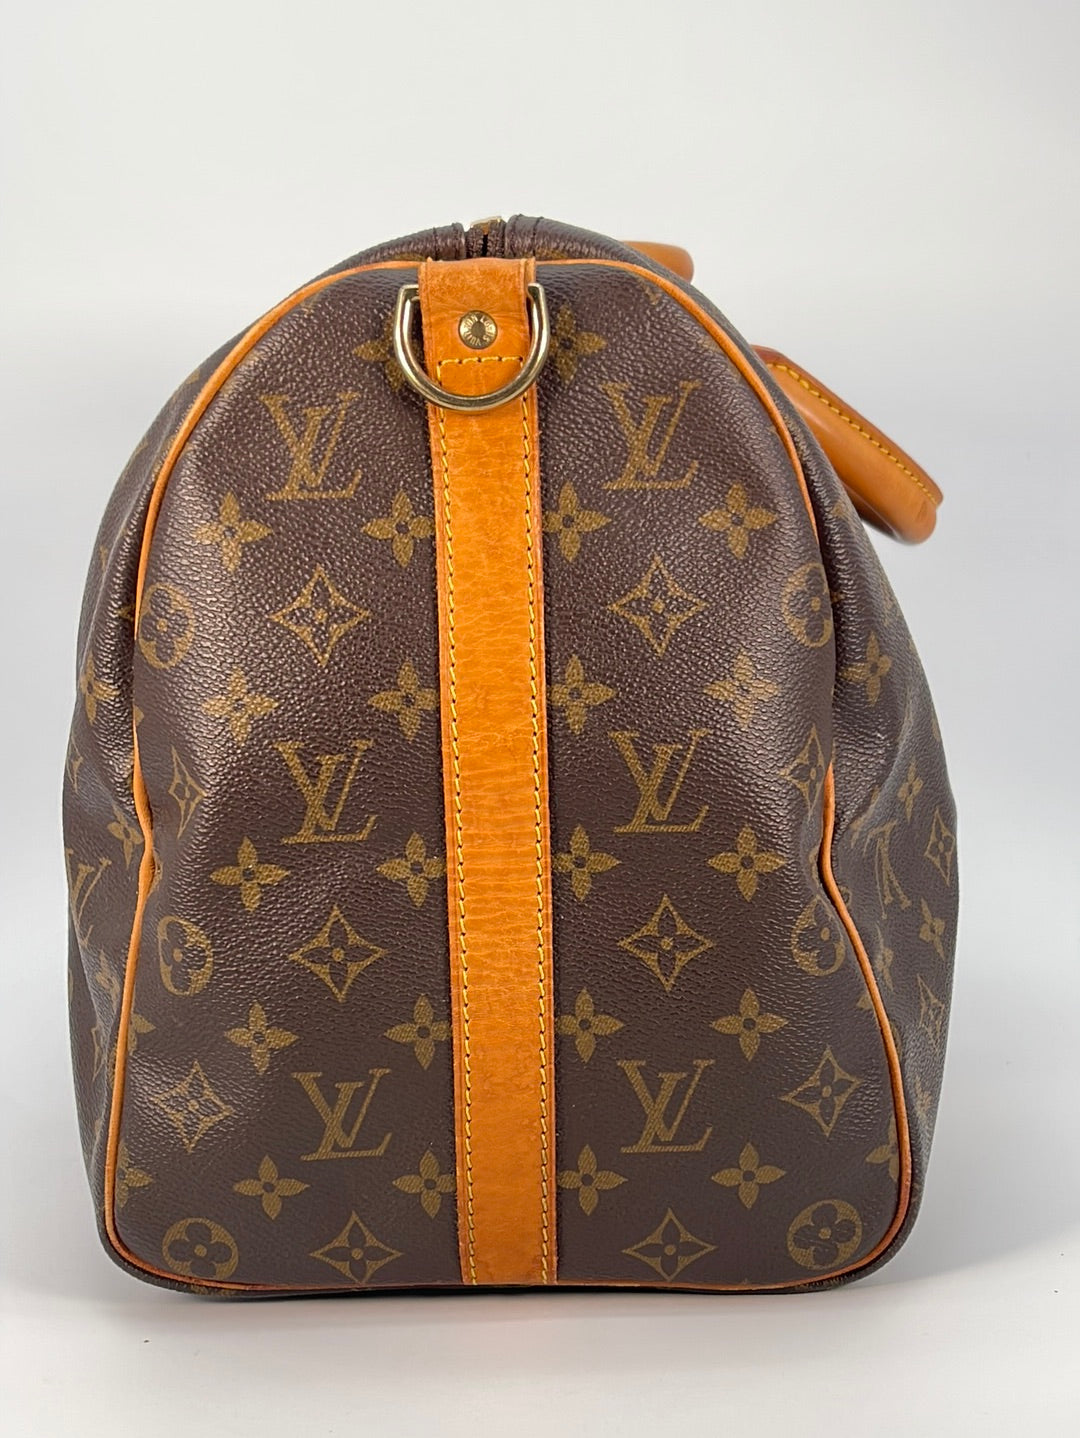 Louis Vuitton - Keepall Bandoulière 45 Nomade – Every Watch